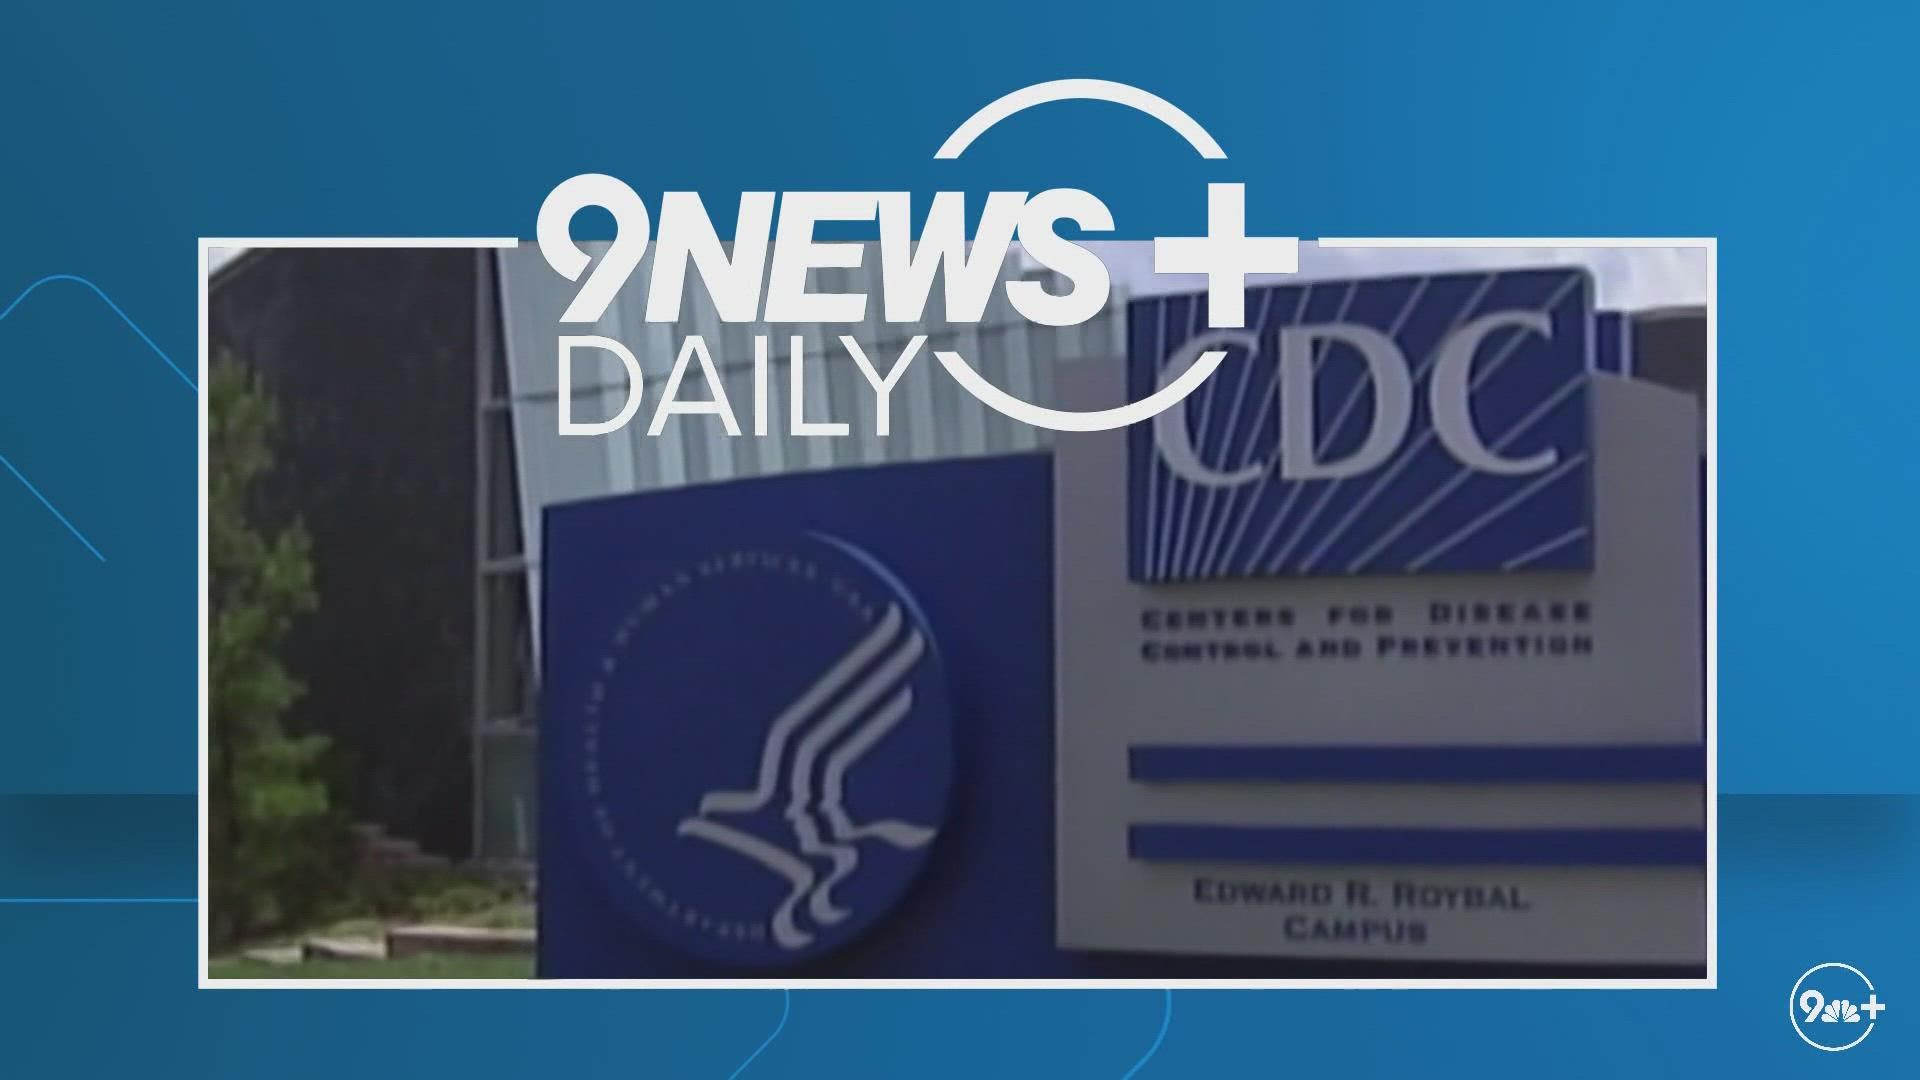 Colorado Department of Public Health and Environment (CDPHE) spokeswoman Vanessa Bernal joined 9NEWS to talk about the recent CDC recommendations.